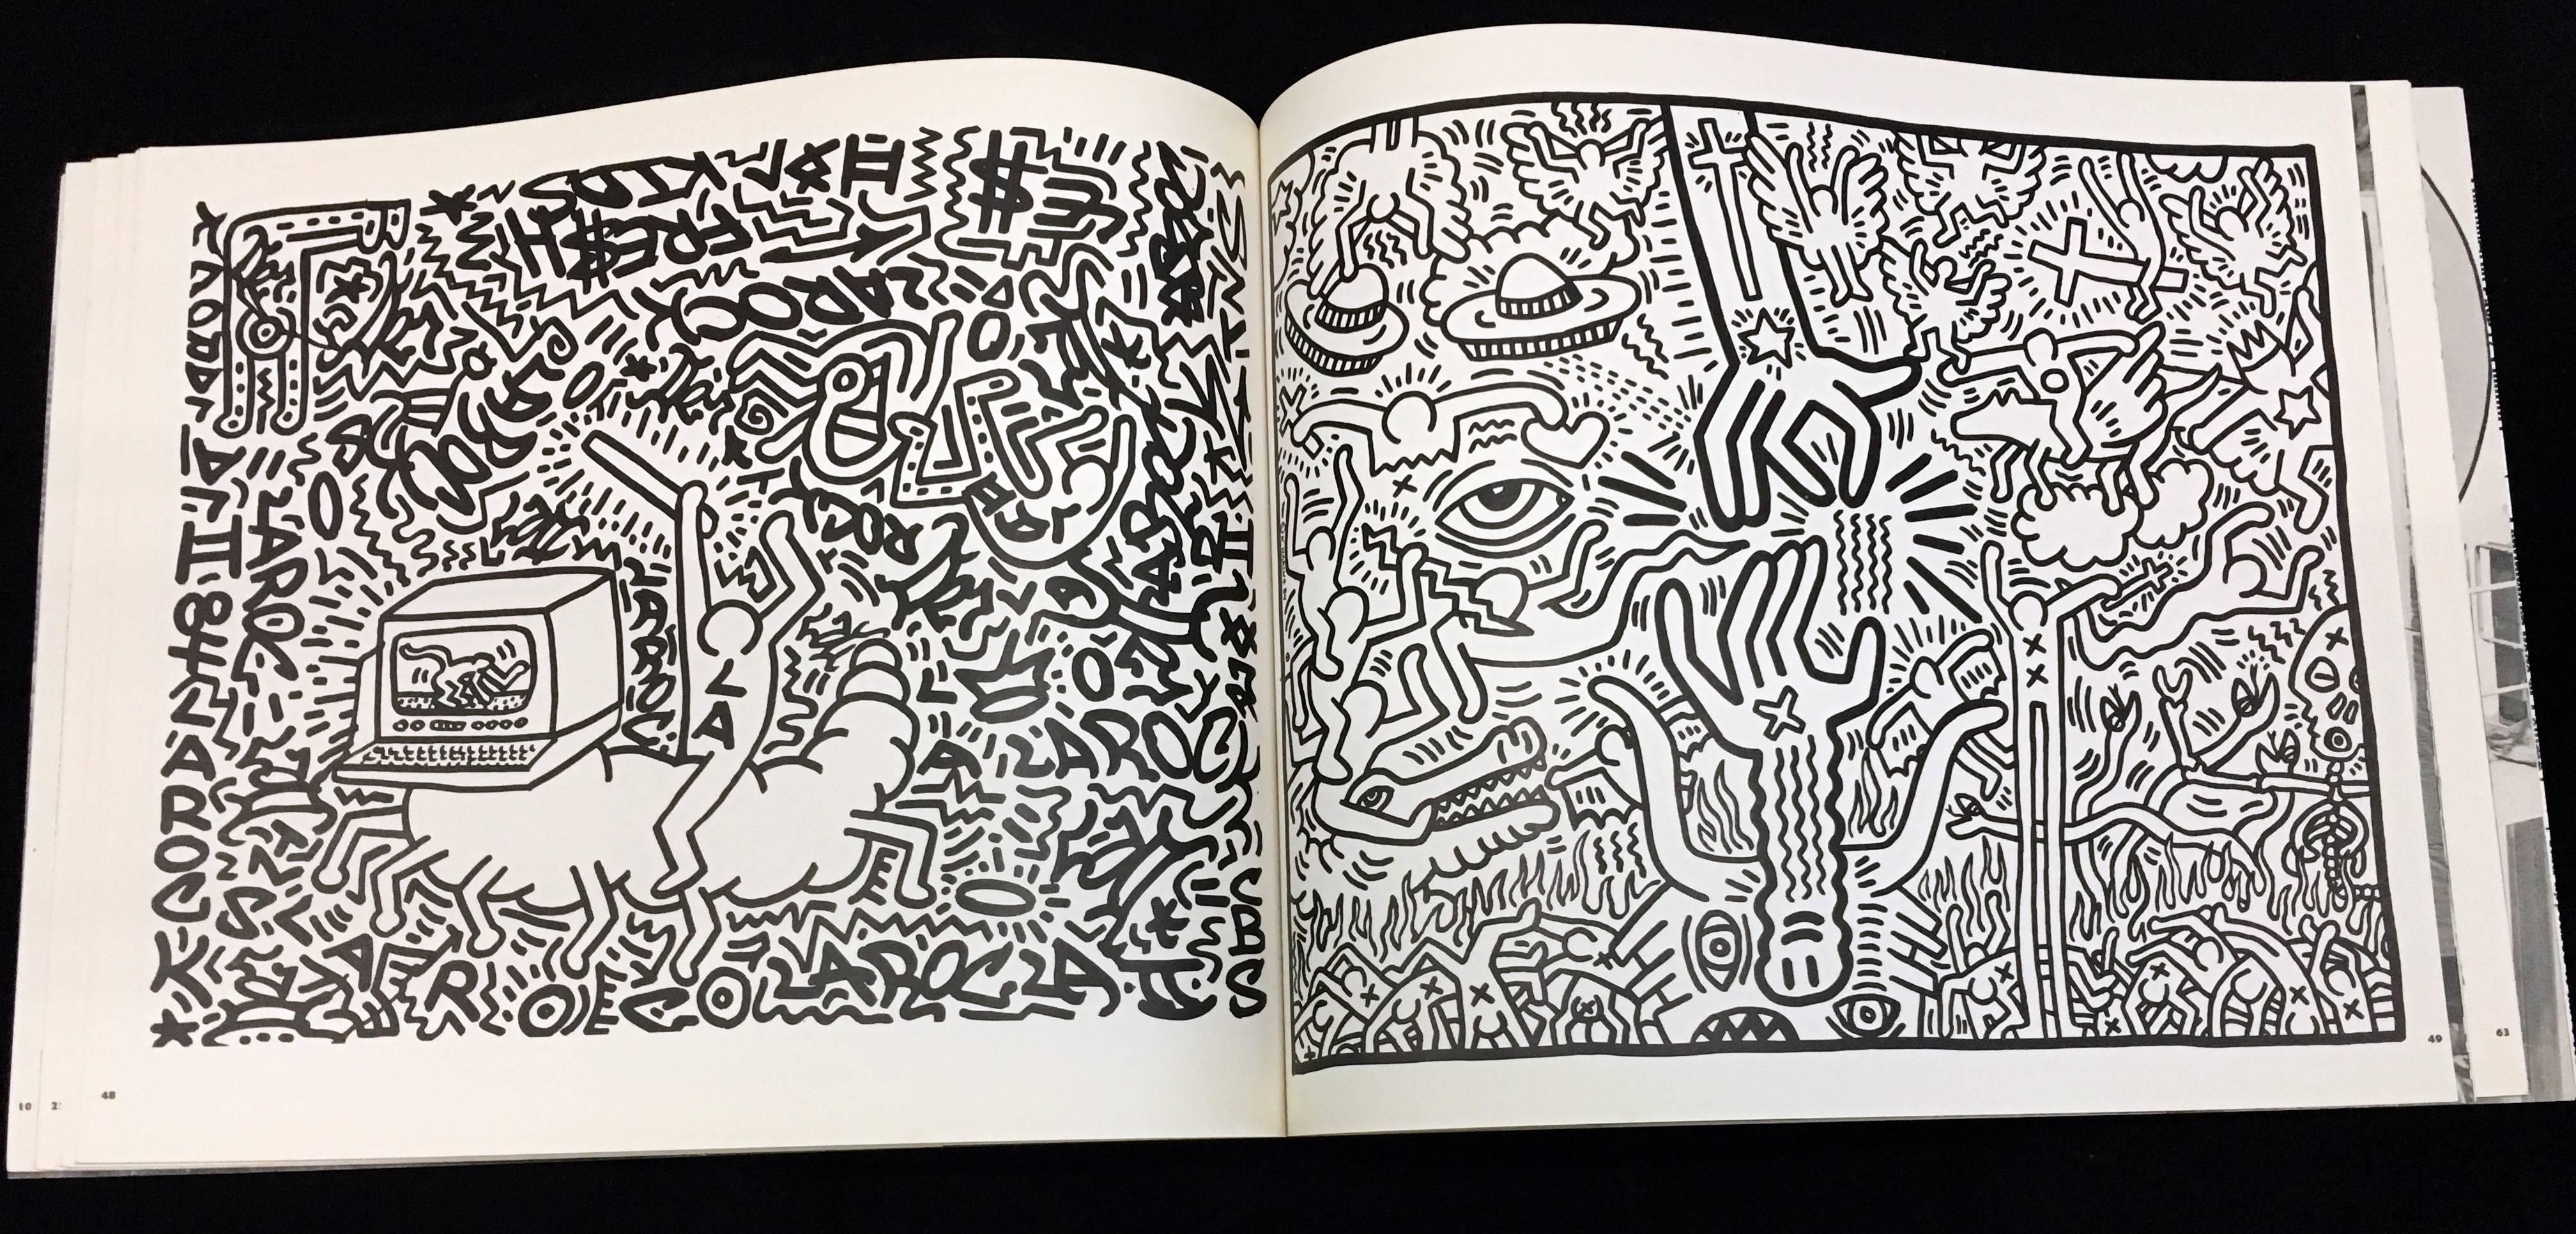 Keith Haring Stedelijk Museum drawing & catalogue (signed Keith Haring drawing)  For Sale 9